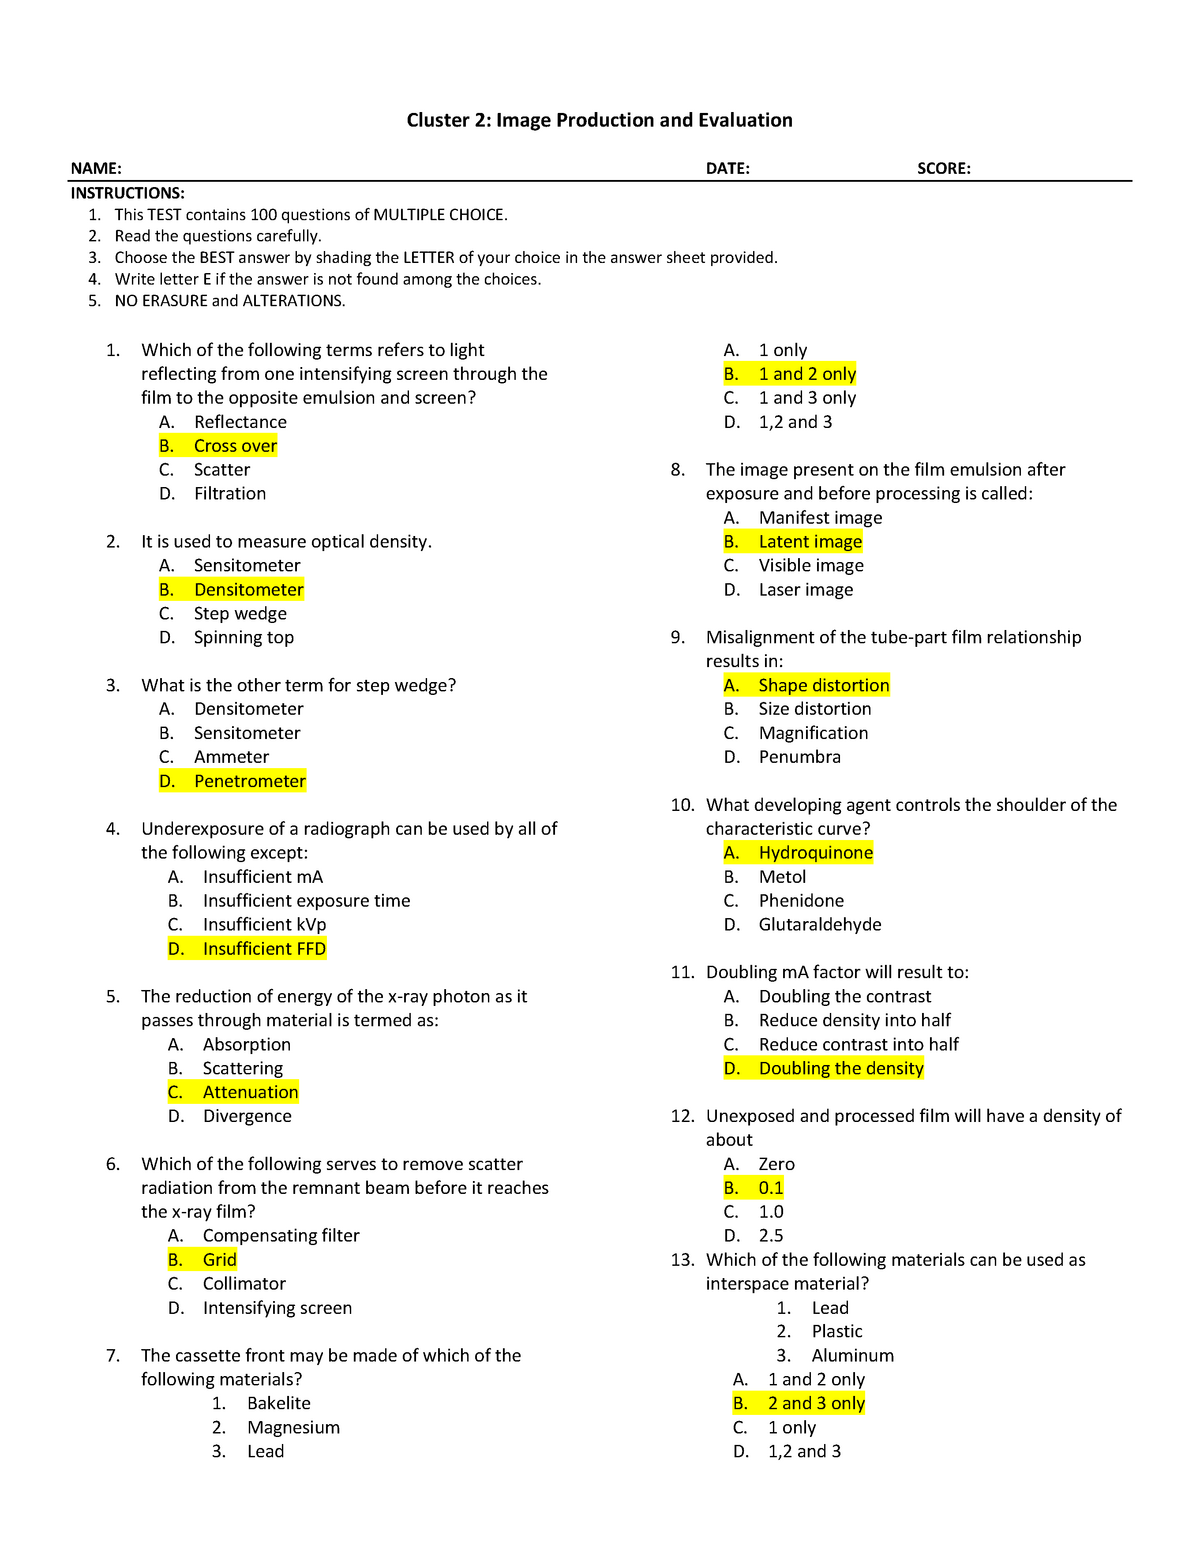 Exam Questions And Answers Cluster 2 Image Production And Evaluation Name Date 6740